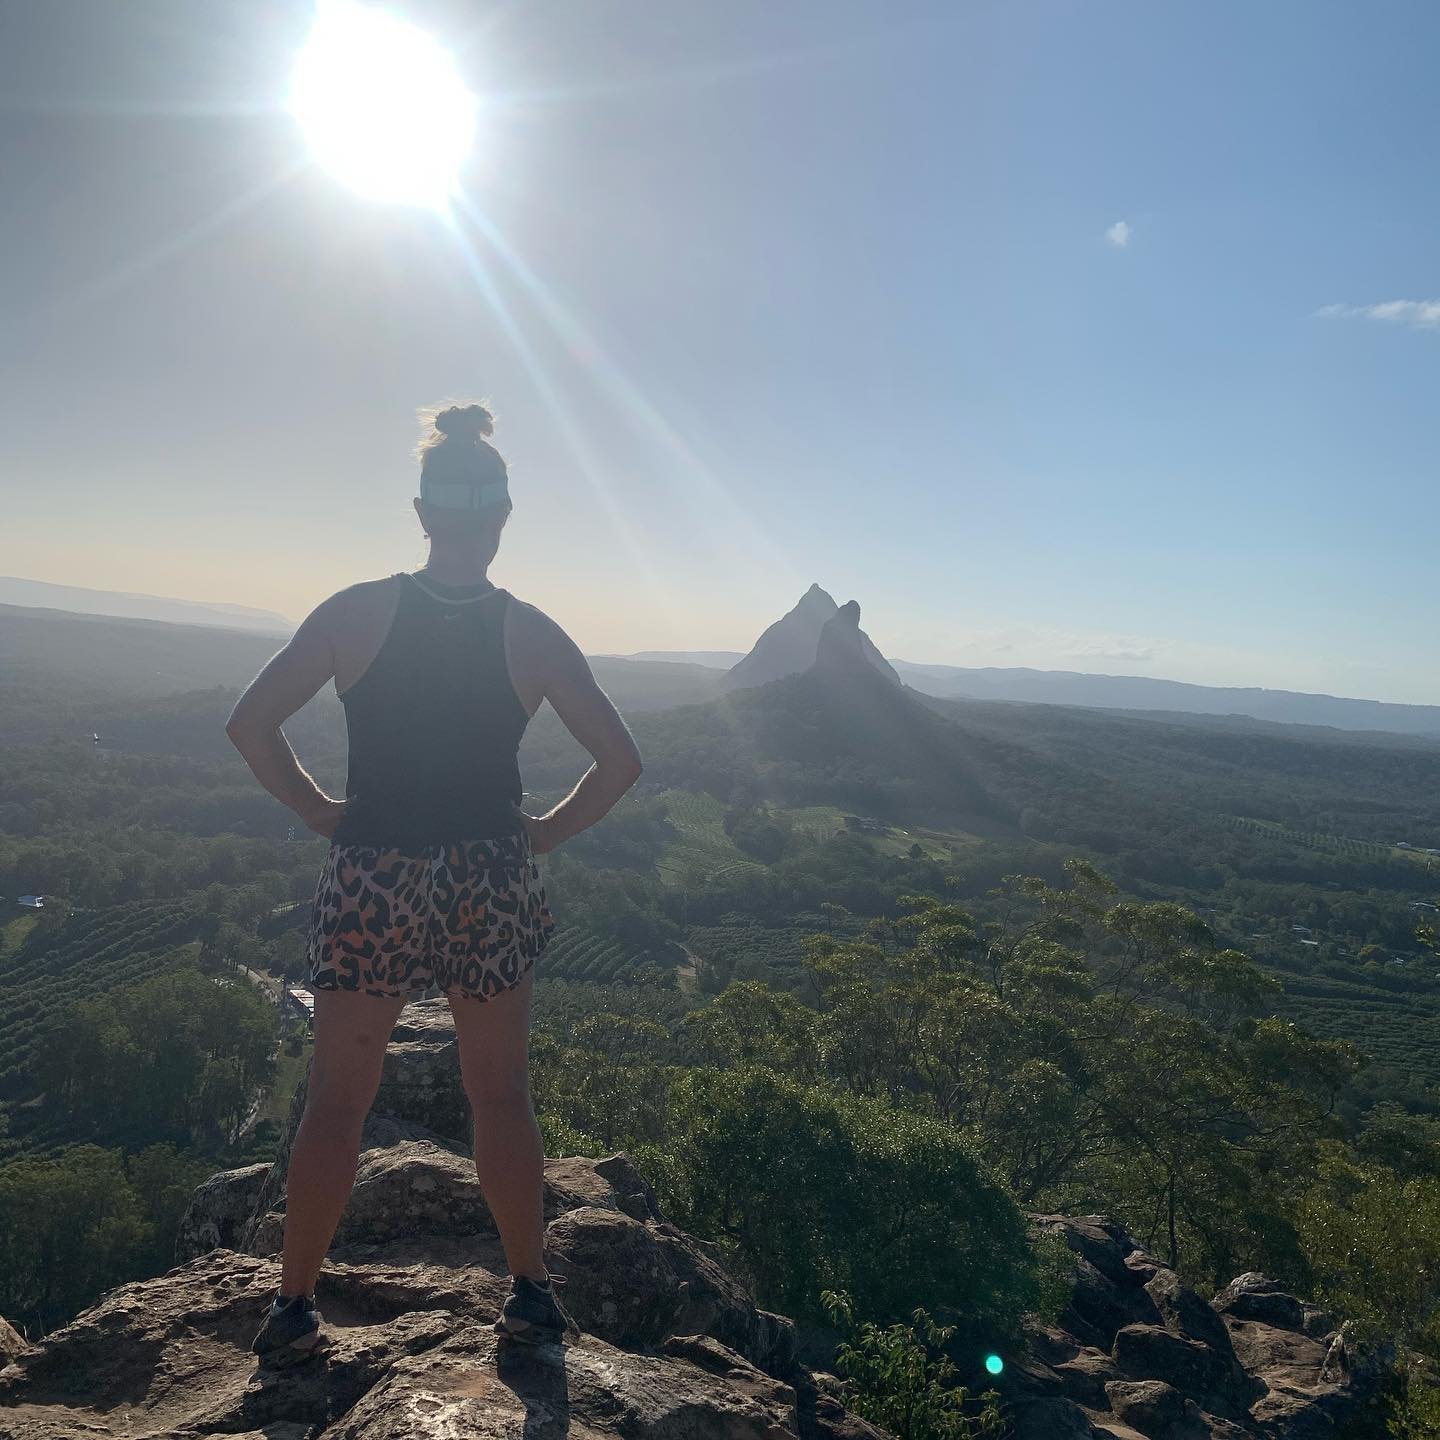 Hikes up the glasshouse mountains